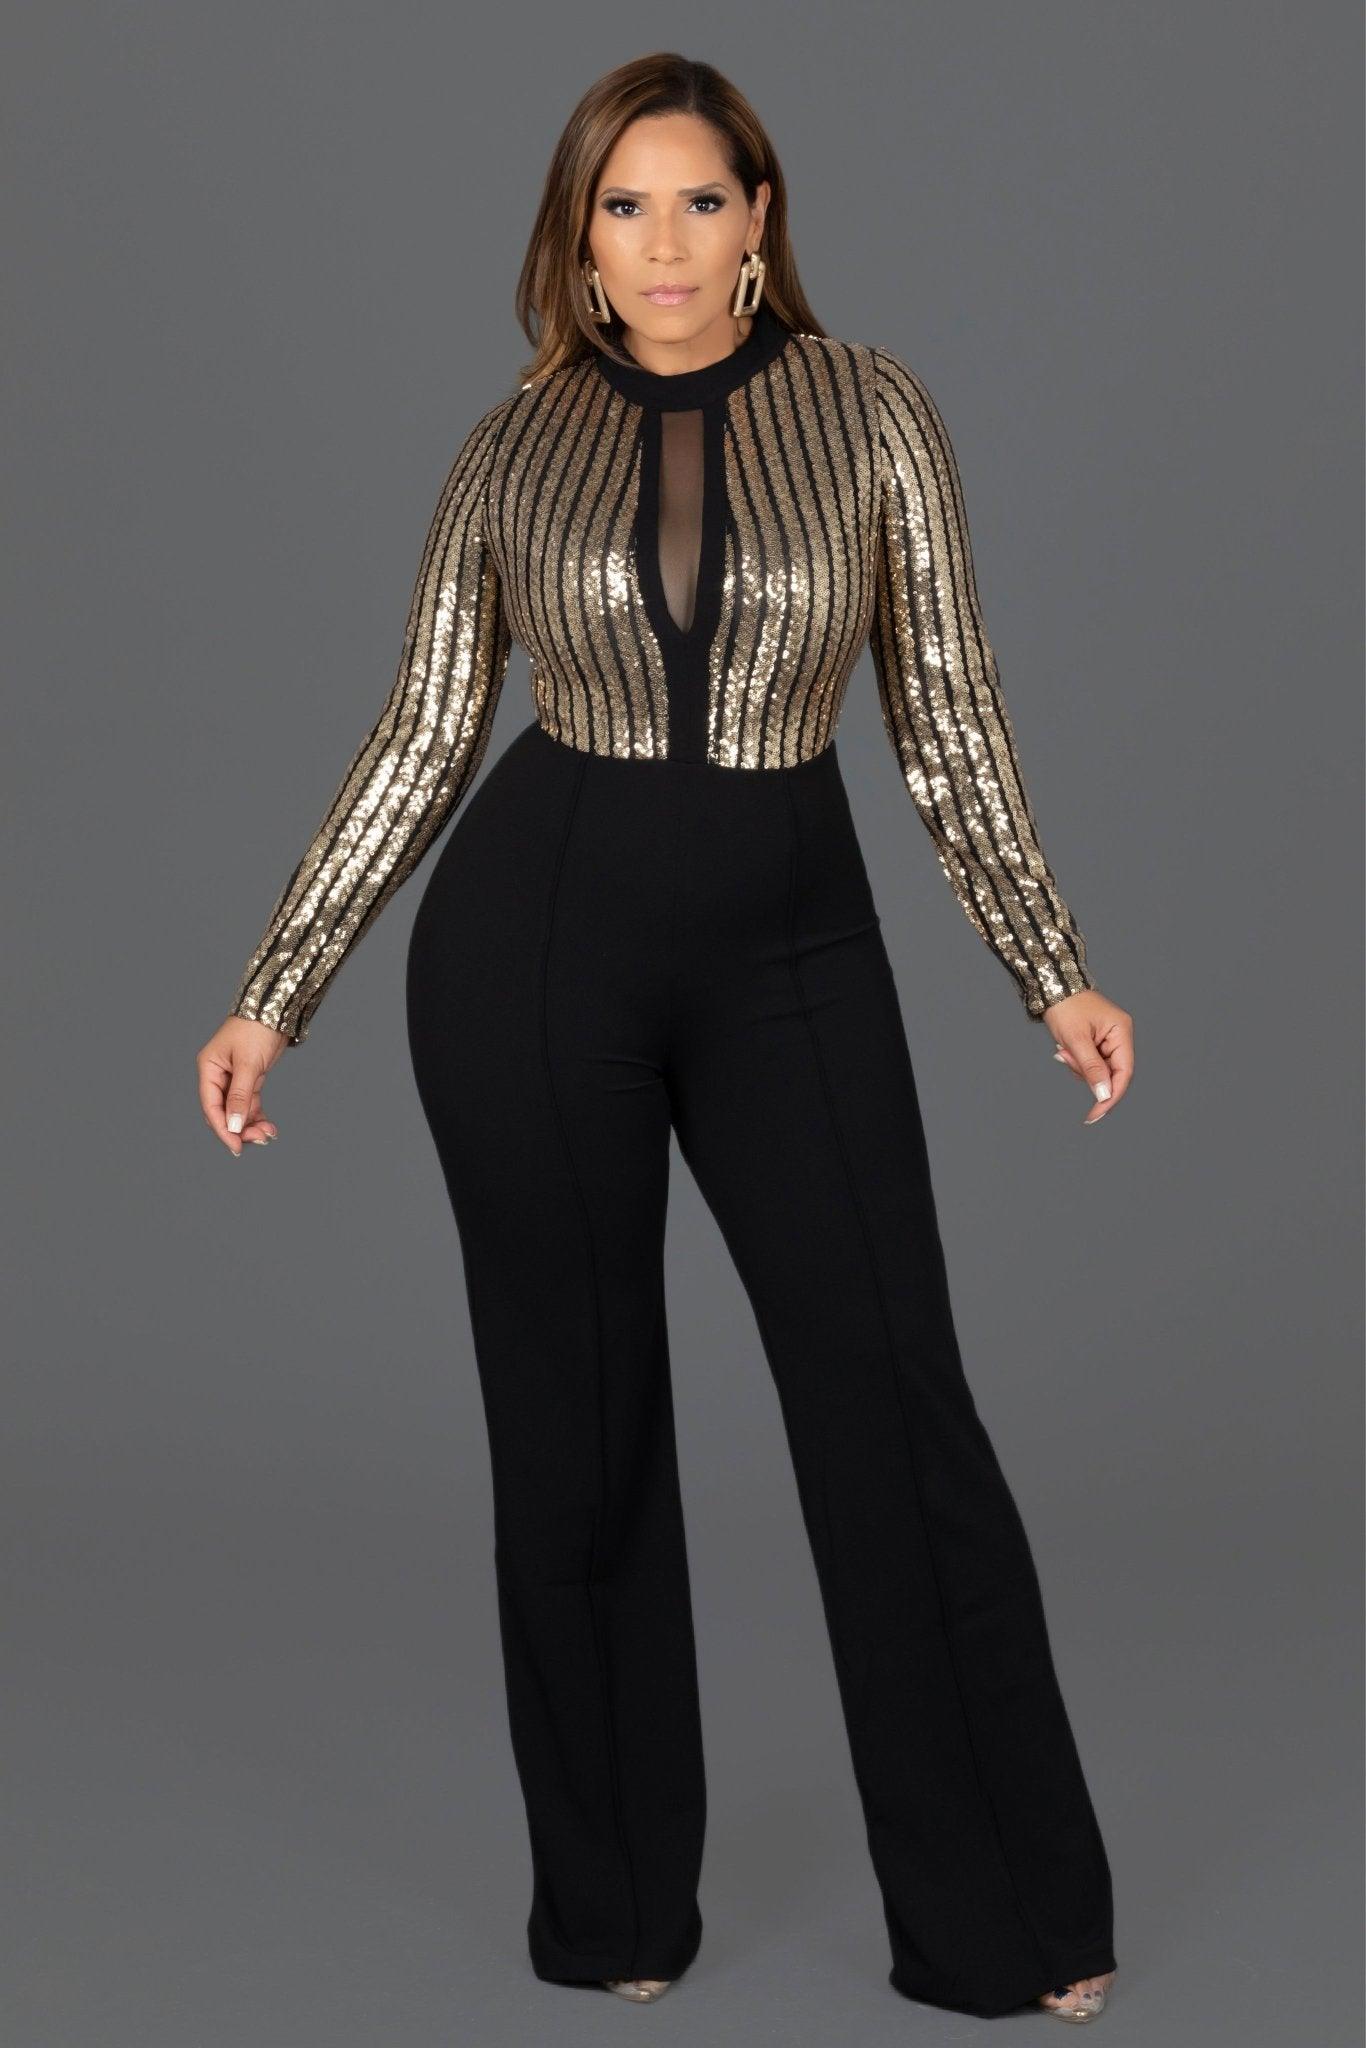 Halo Sequined Pattern Jumpsuit - MY SEXY STYLES